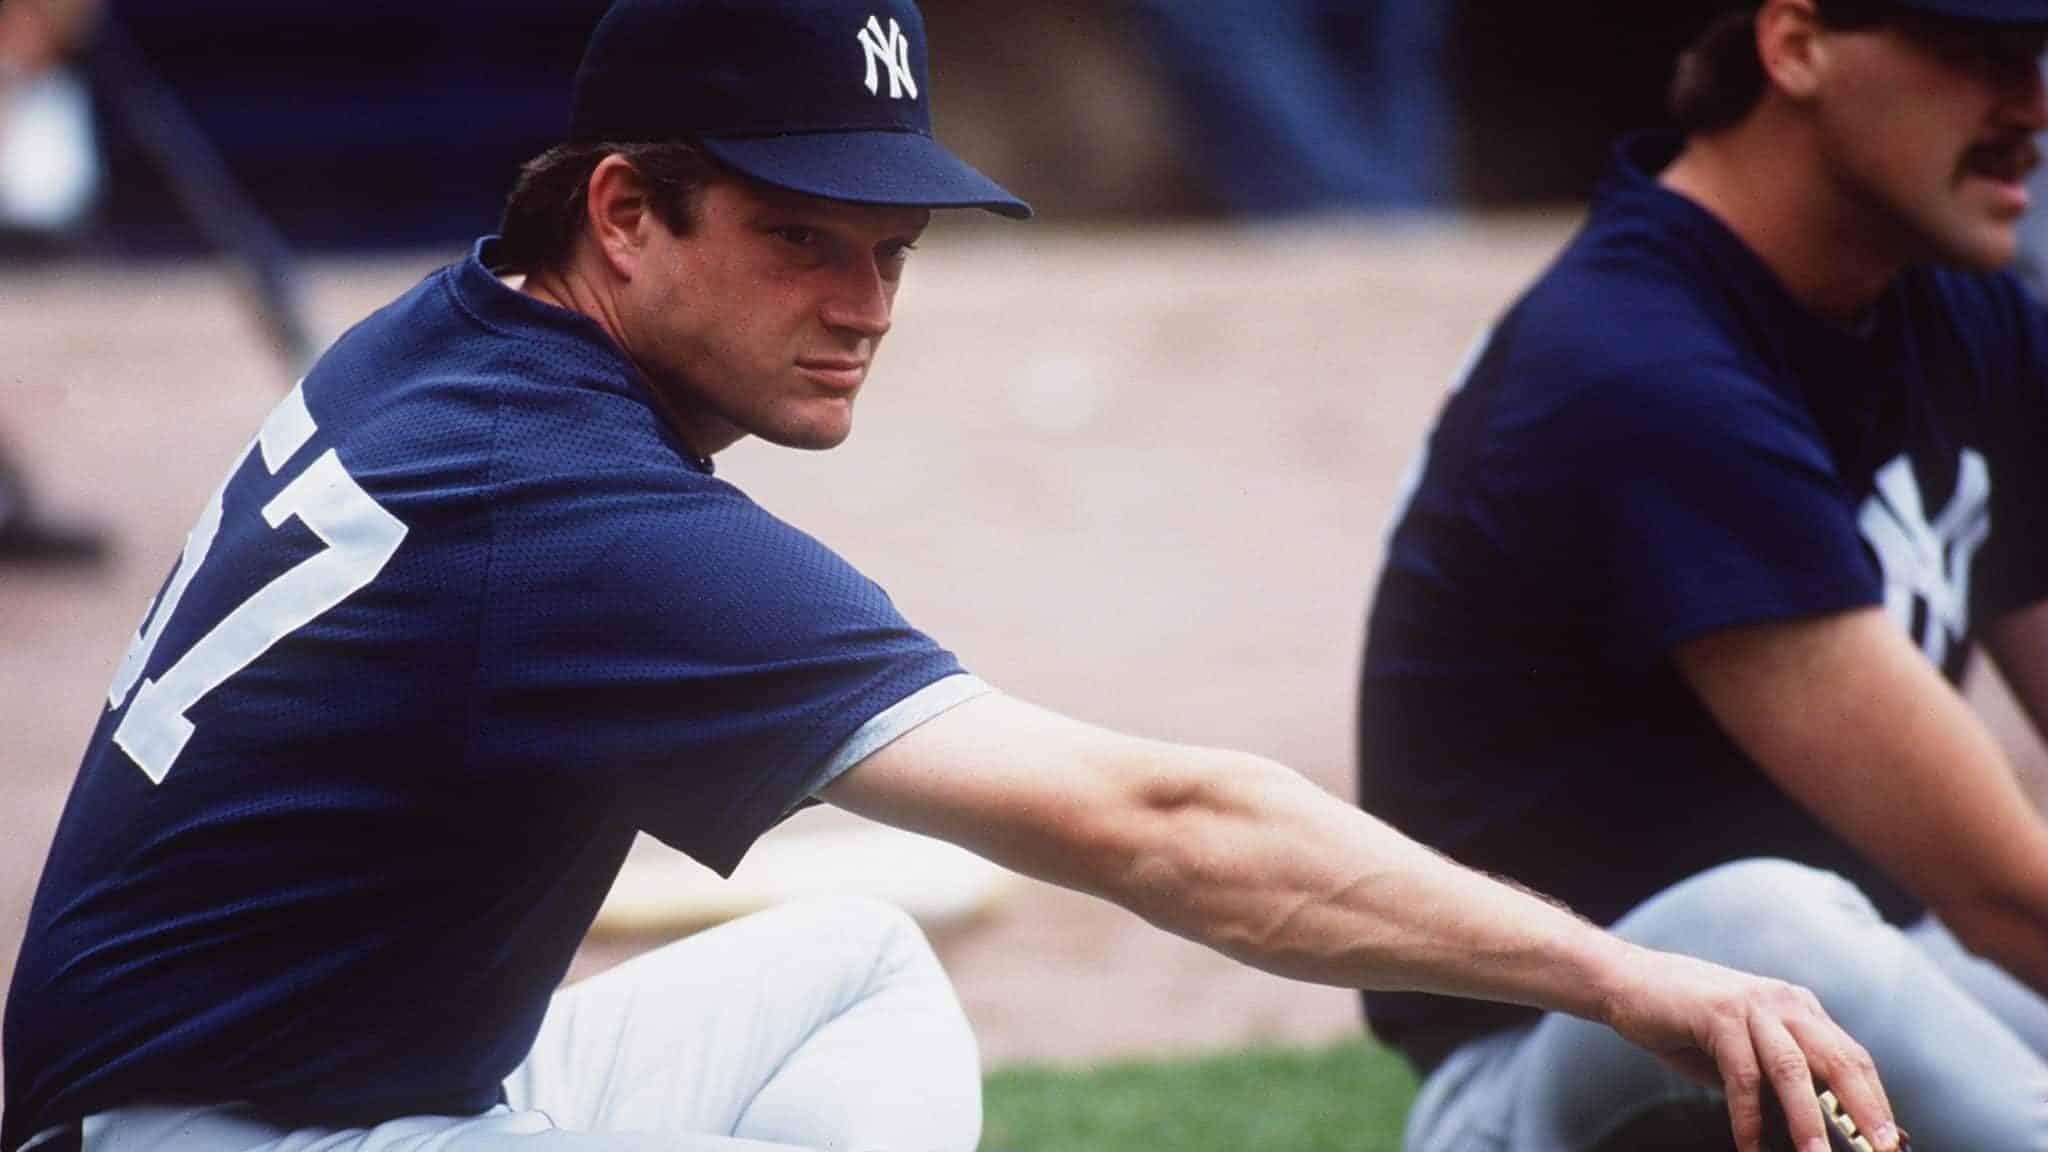 1991: NEW YORK PITCHER STEVE HOWE STRETCHES BEFORE THE YANKEES GAME VERSUS THE CHICAGO WHITE SOX AT COMISKEY PARK IN CHICAGO, ILLINOIS.